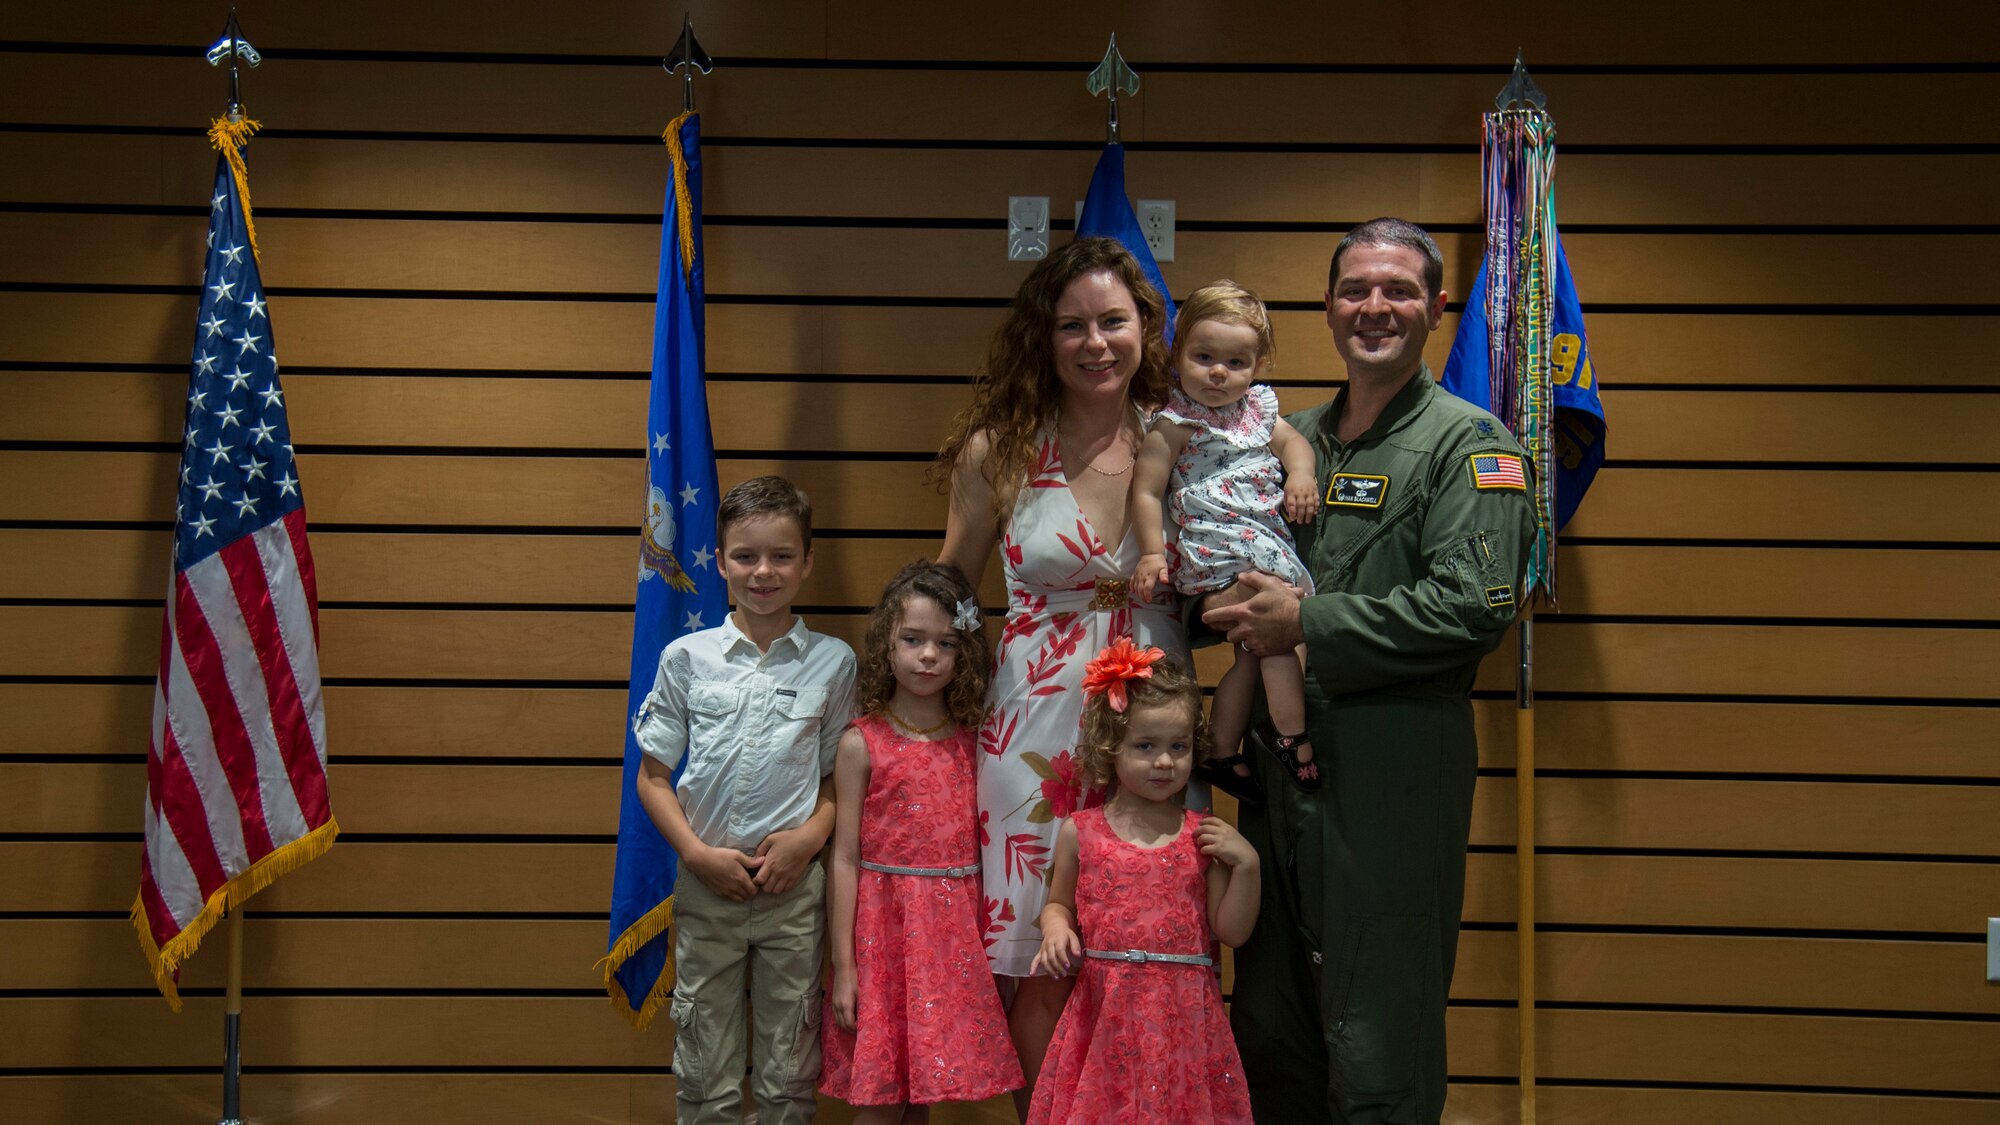 U.S. Air Force Lt. Col. Ivan Blackwell, the 91st Air Refueling Squadron commander pauses for a photo with his wife Karen, son David, and daughters Eloise, Lucia and Gracie, following a change of command ceremony, June 5, 2020, at MacDill Air Force Base, Fla.